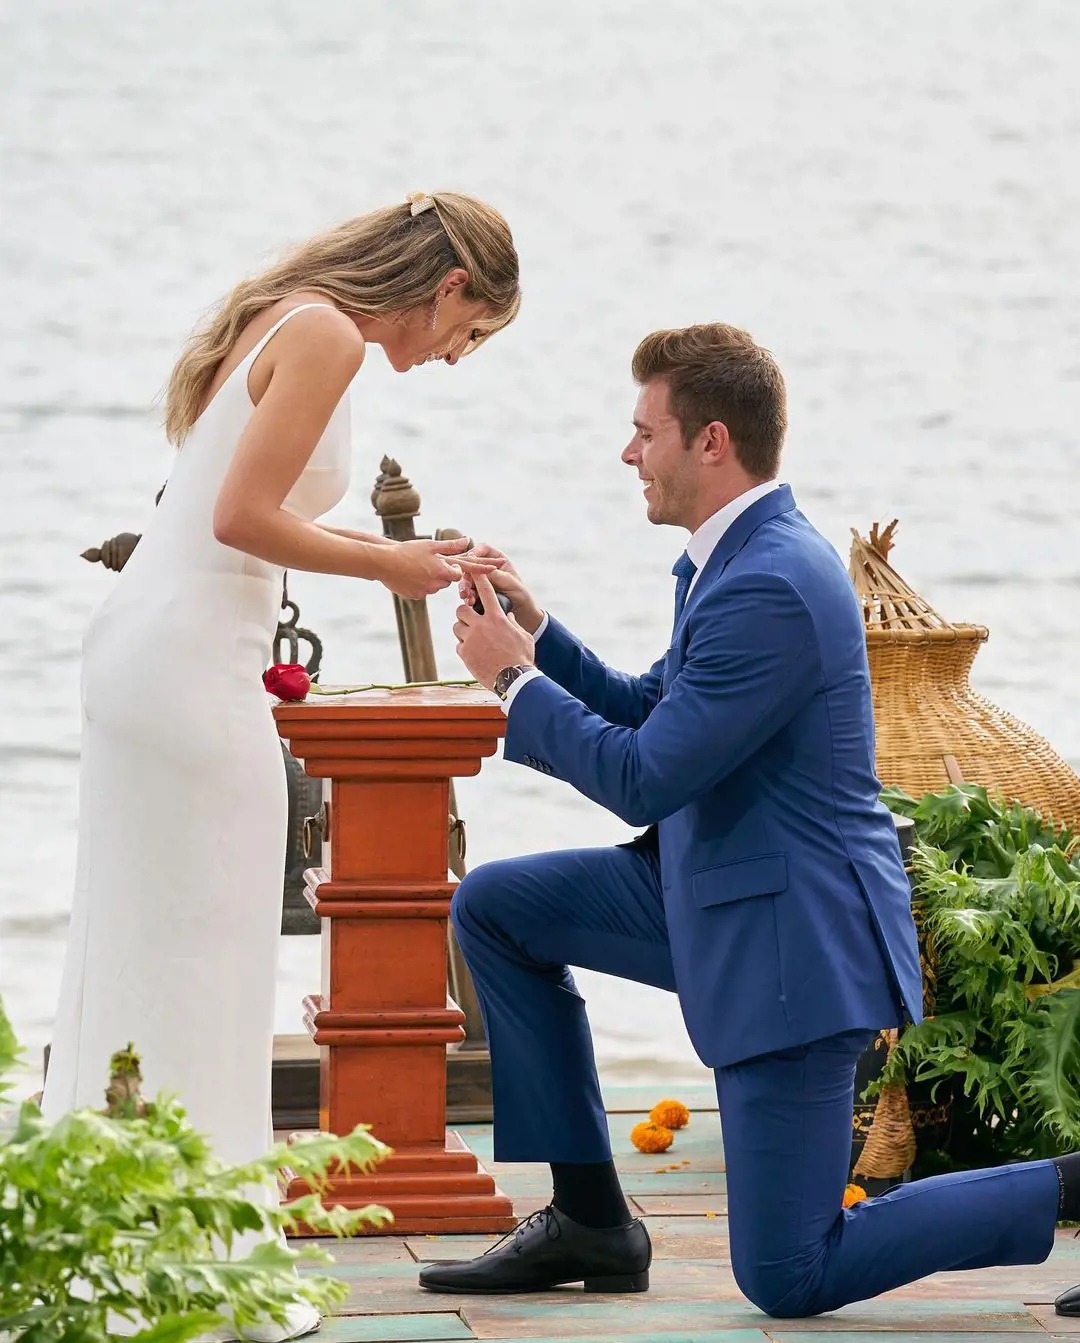 Zach Proposing To His Love Interest Kaity In Thailand On 27 March 2023